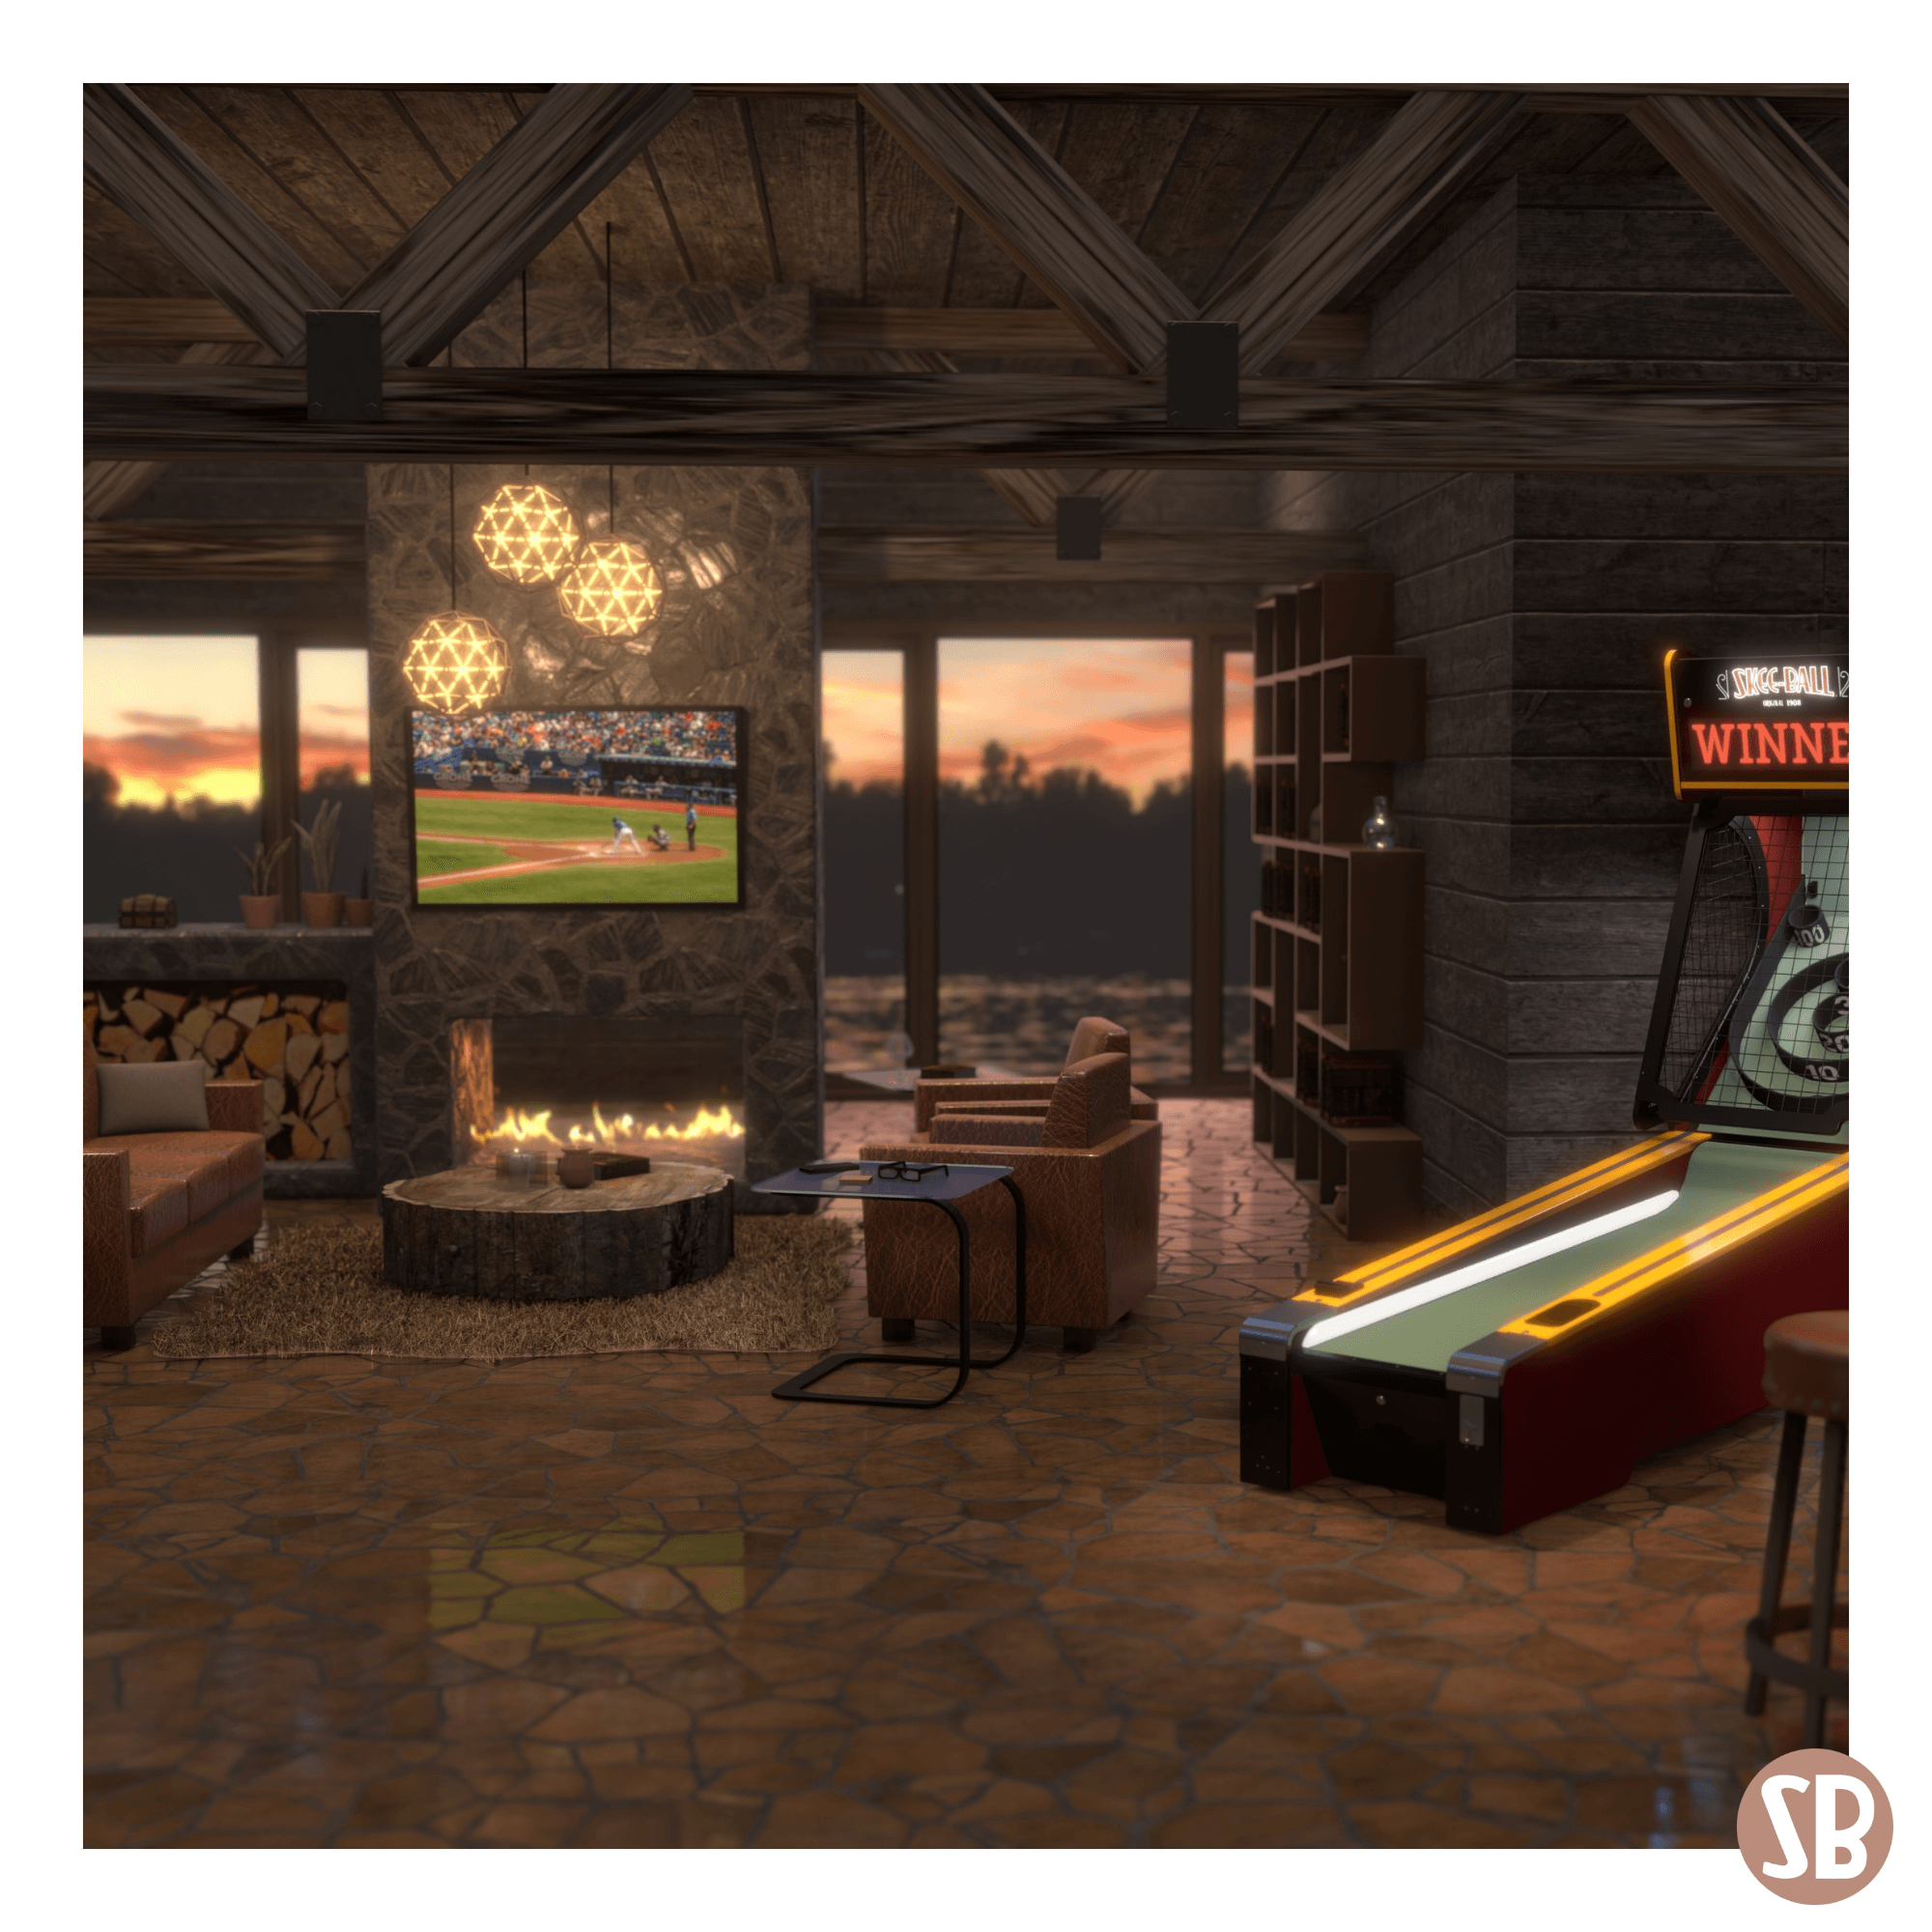 A Skee-Ball Home Alley machine in a cozy cabin with a fireplace 